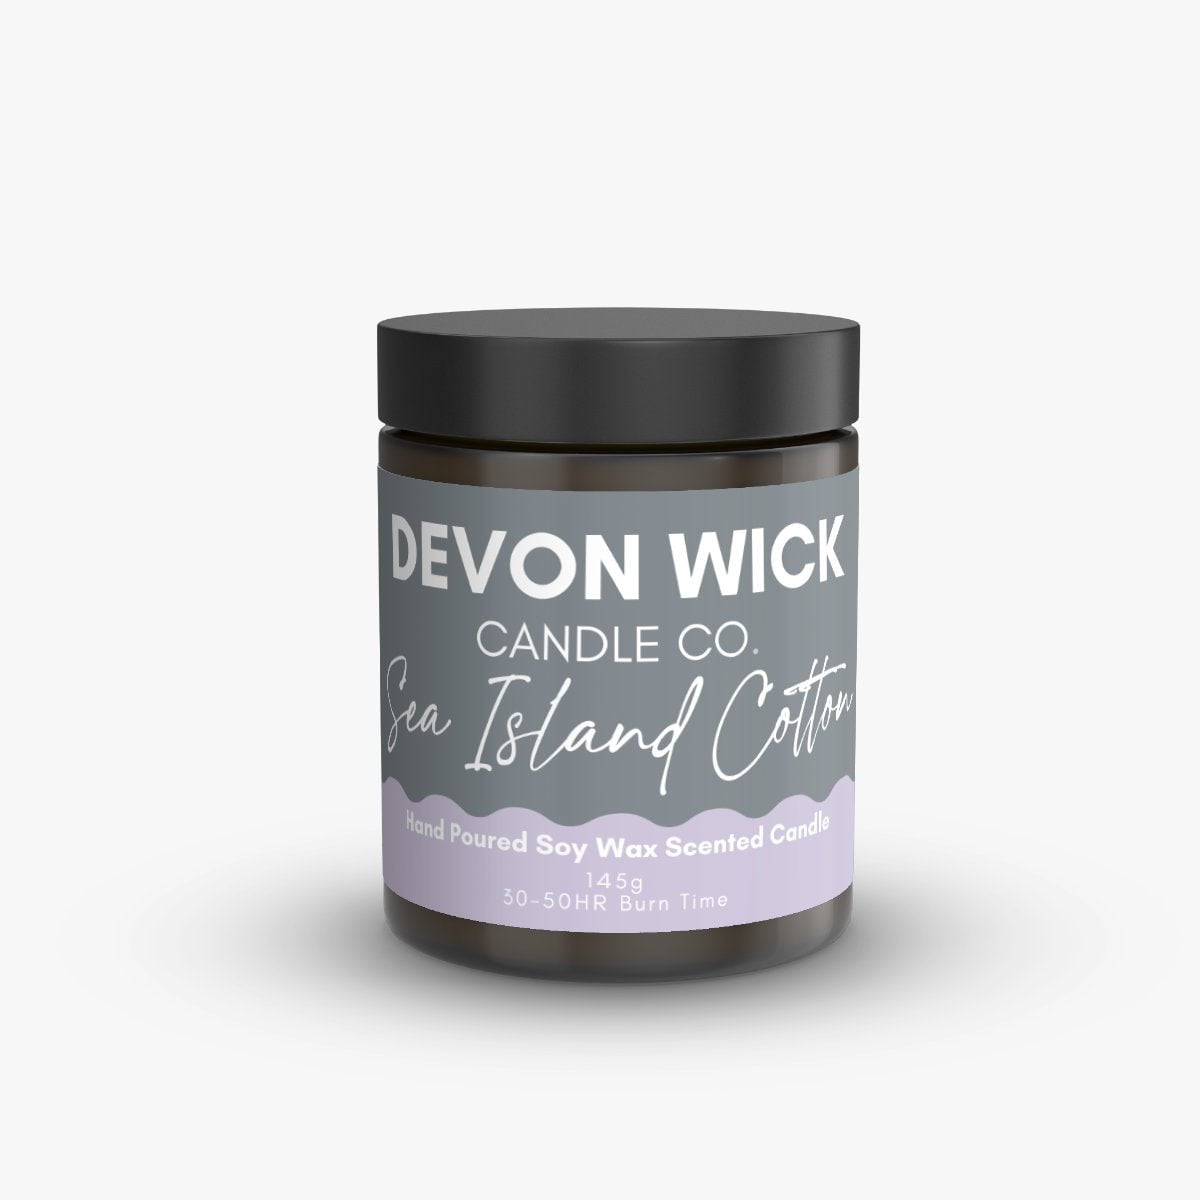 Devon Wick Candle Co. Limited Sea Island Cotton Soy Wax Candle